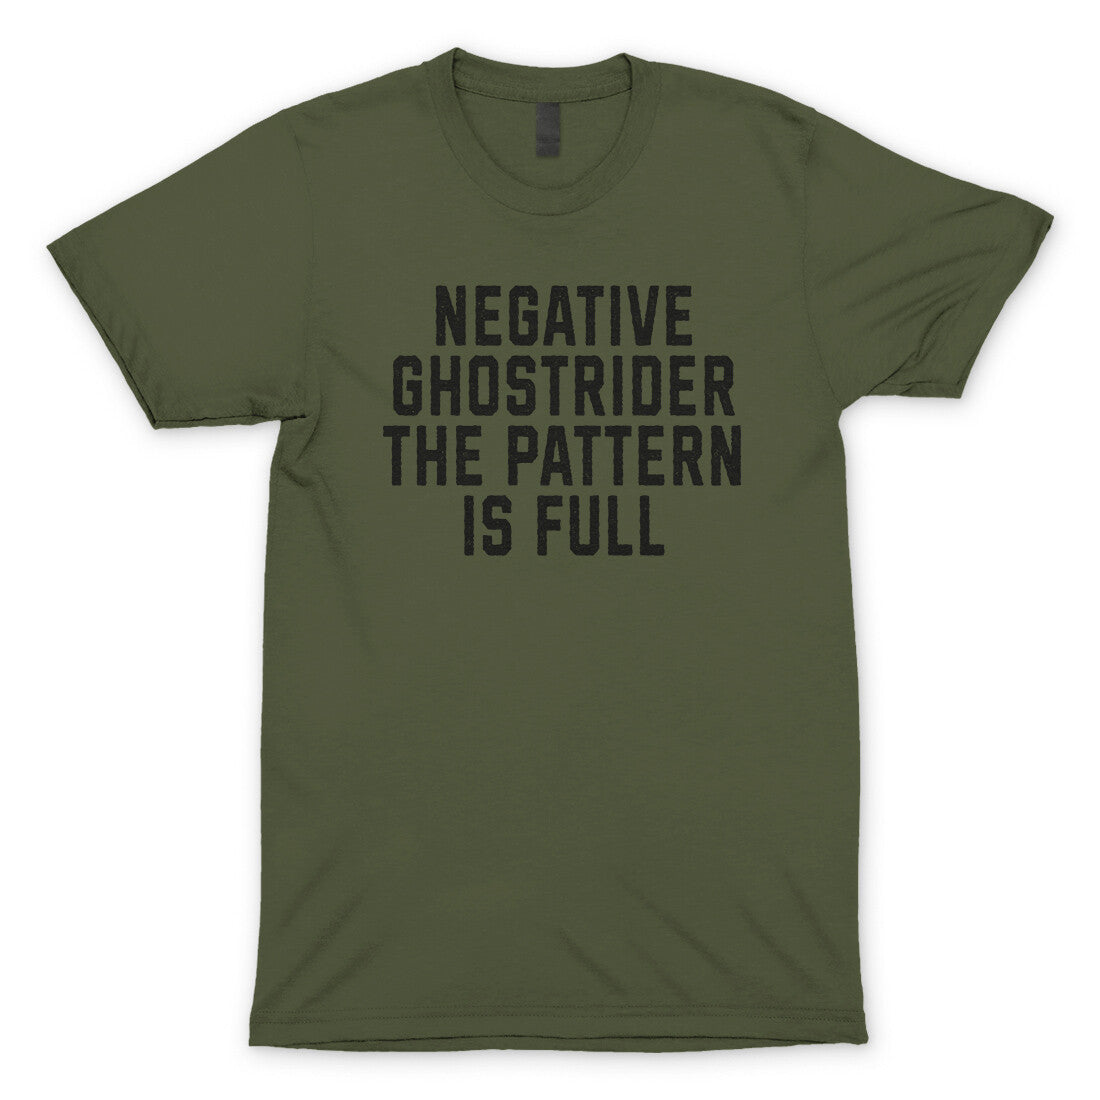 Negative Ghostrider the Pattern is Full in Military Green Color